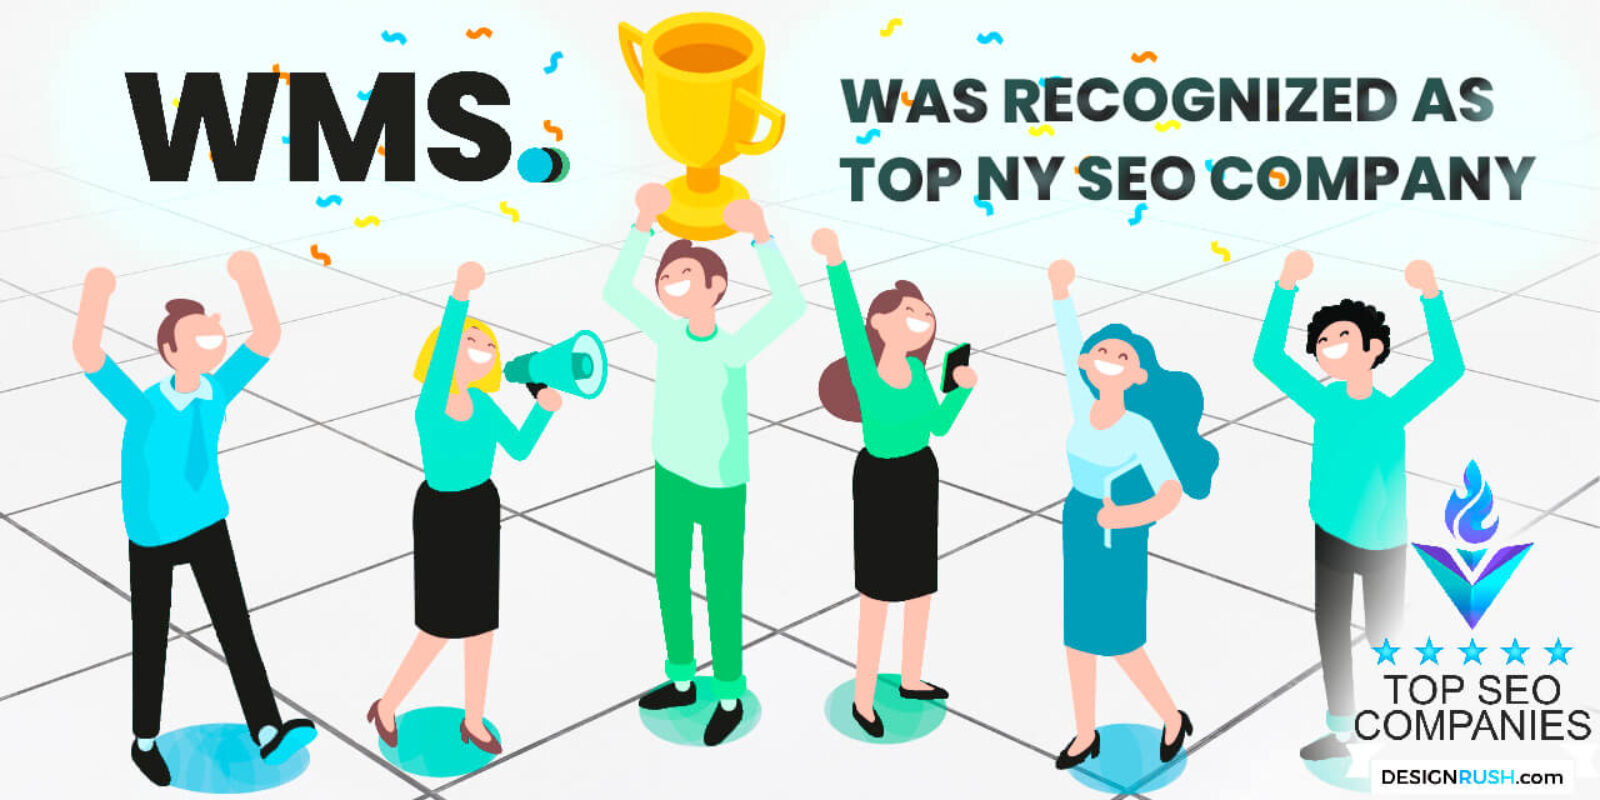 WMS Was Recognized As Top NY SEO Company